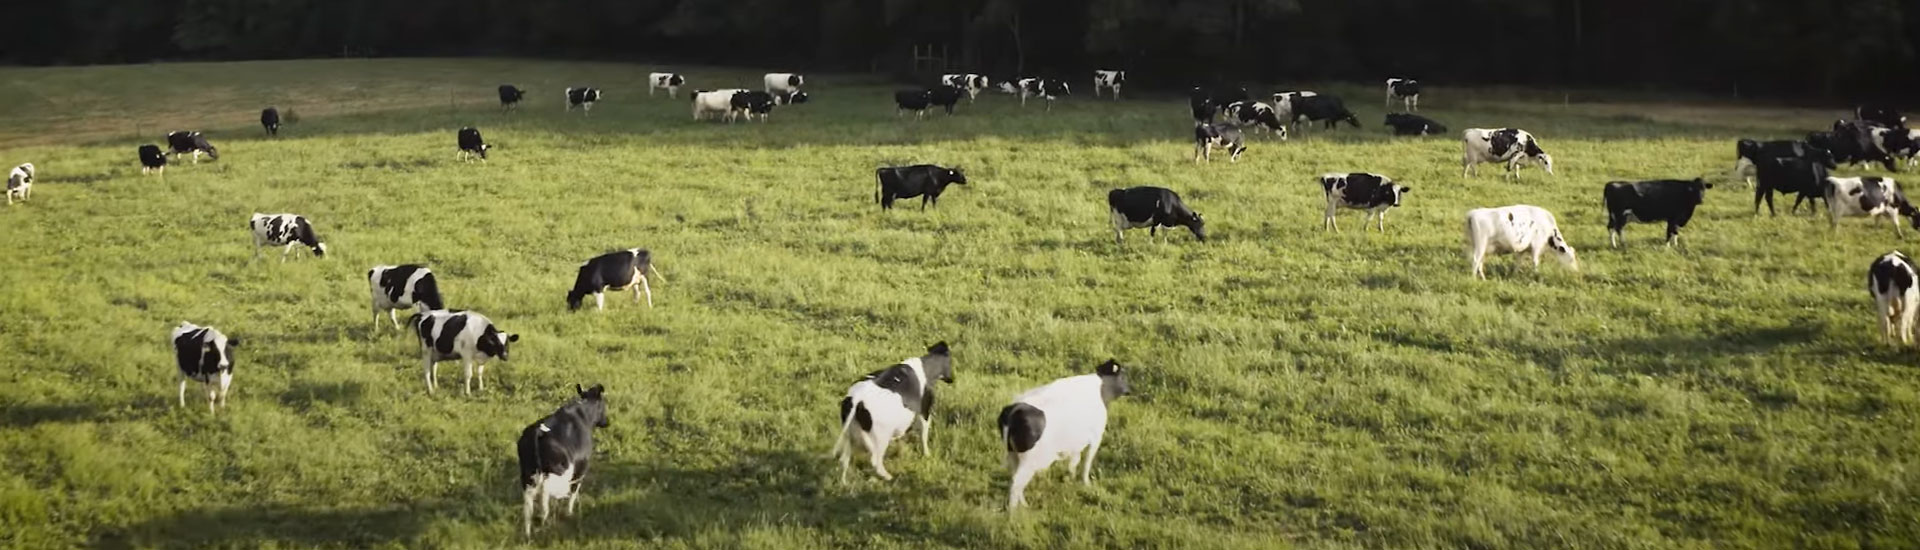 imgHow Hitachi and Happy Cow Creamery Are Using Smart Technology to Advance Agriculture